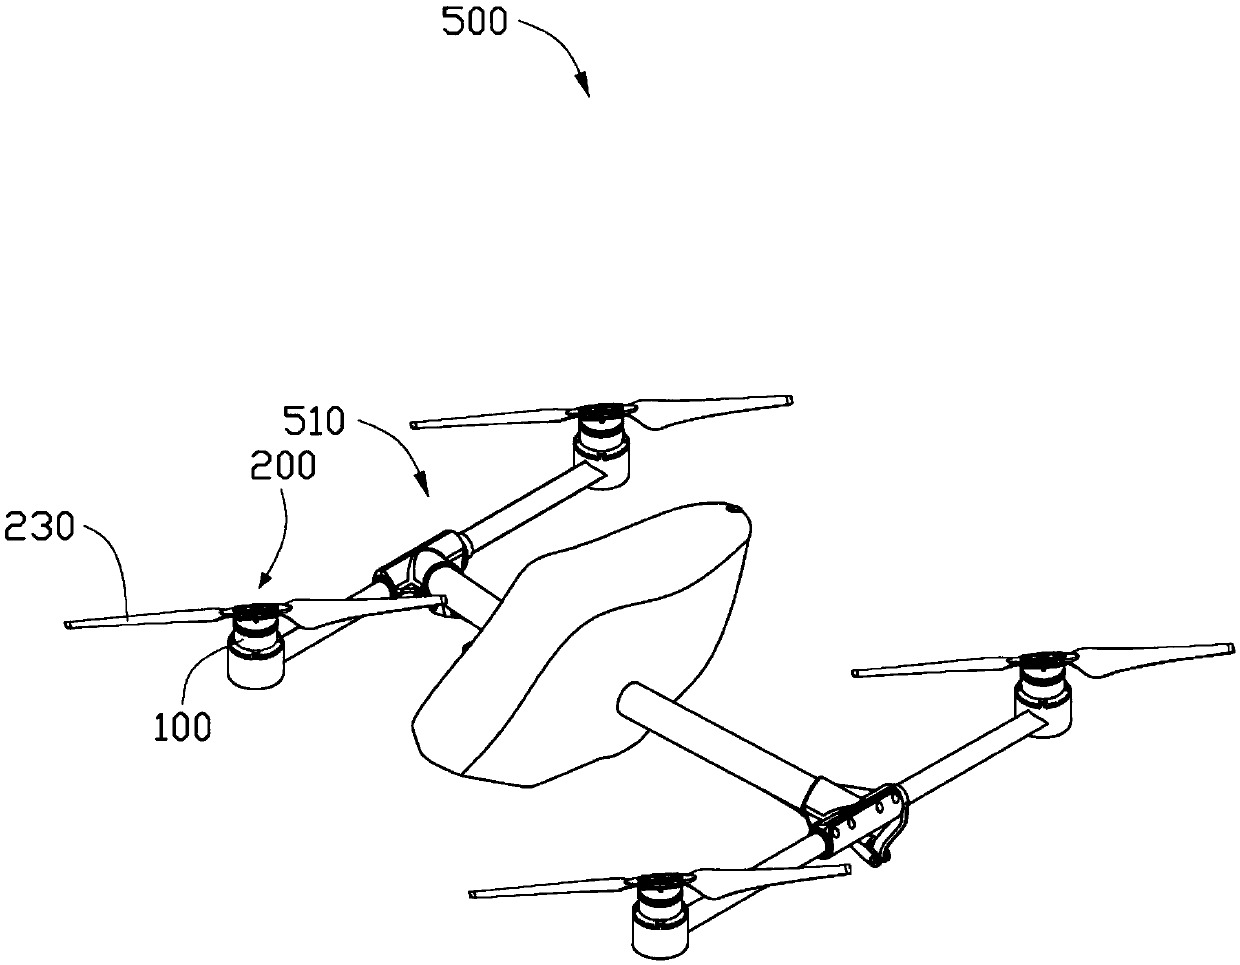 Motor, power device and aircraft using power device